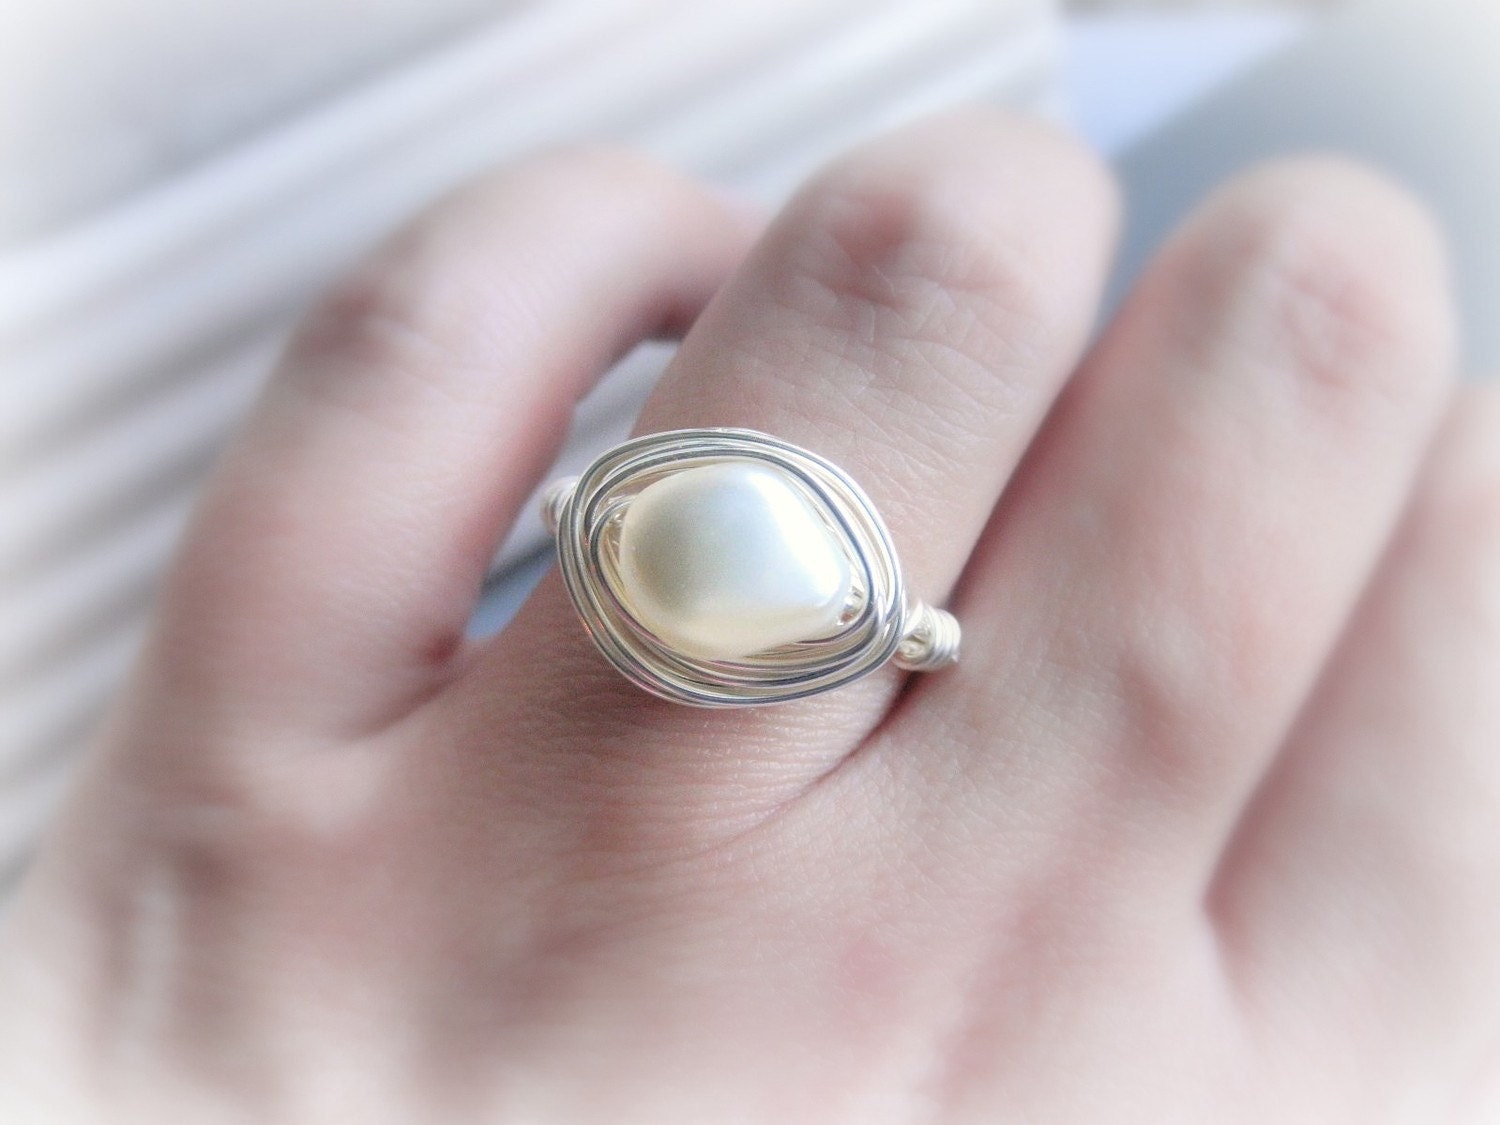 Wire Wrapped Wedding Ring Size 7. 5 - Swarovski Curved Pearl, Cream, White, Ivory, Beige, Bright, Bride, Bridal, Simple, Cute, Classic, Romantic, Lovely